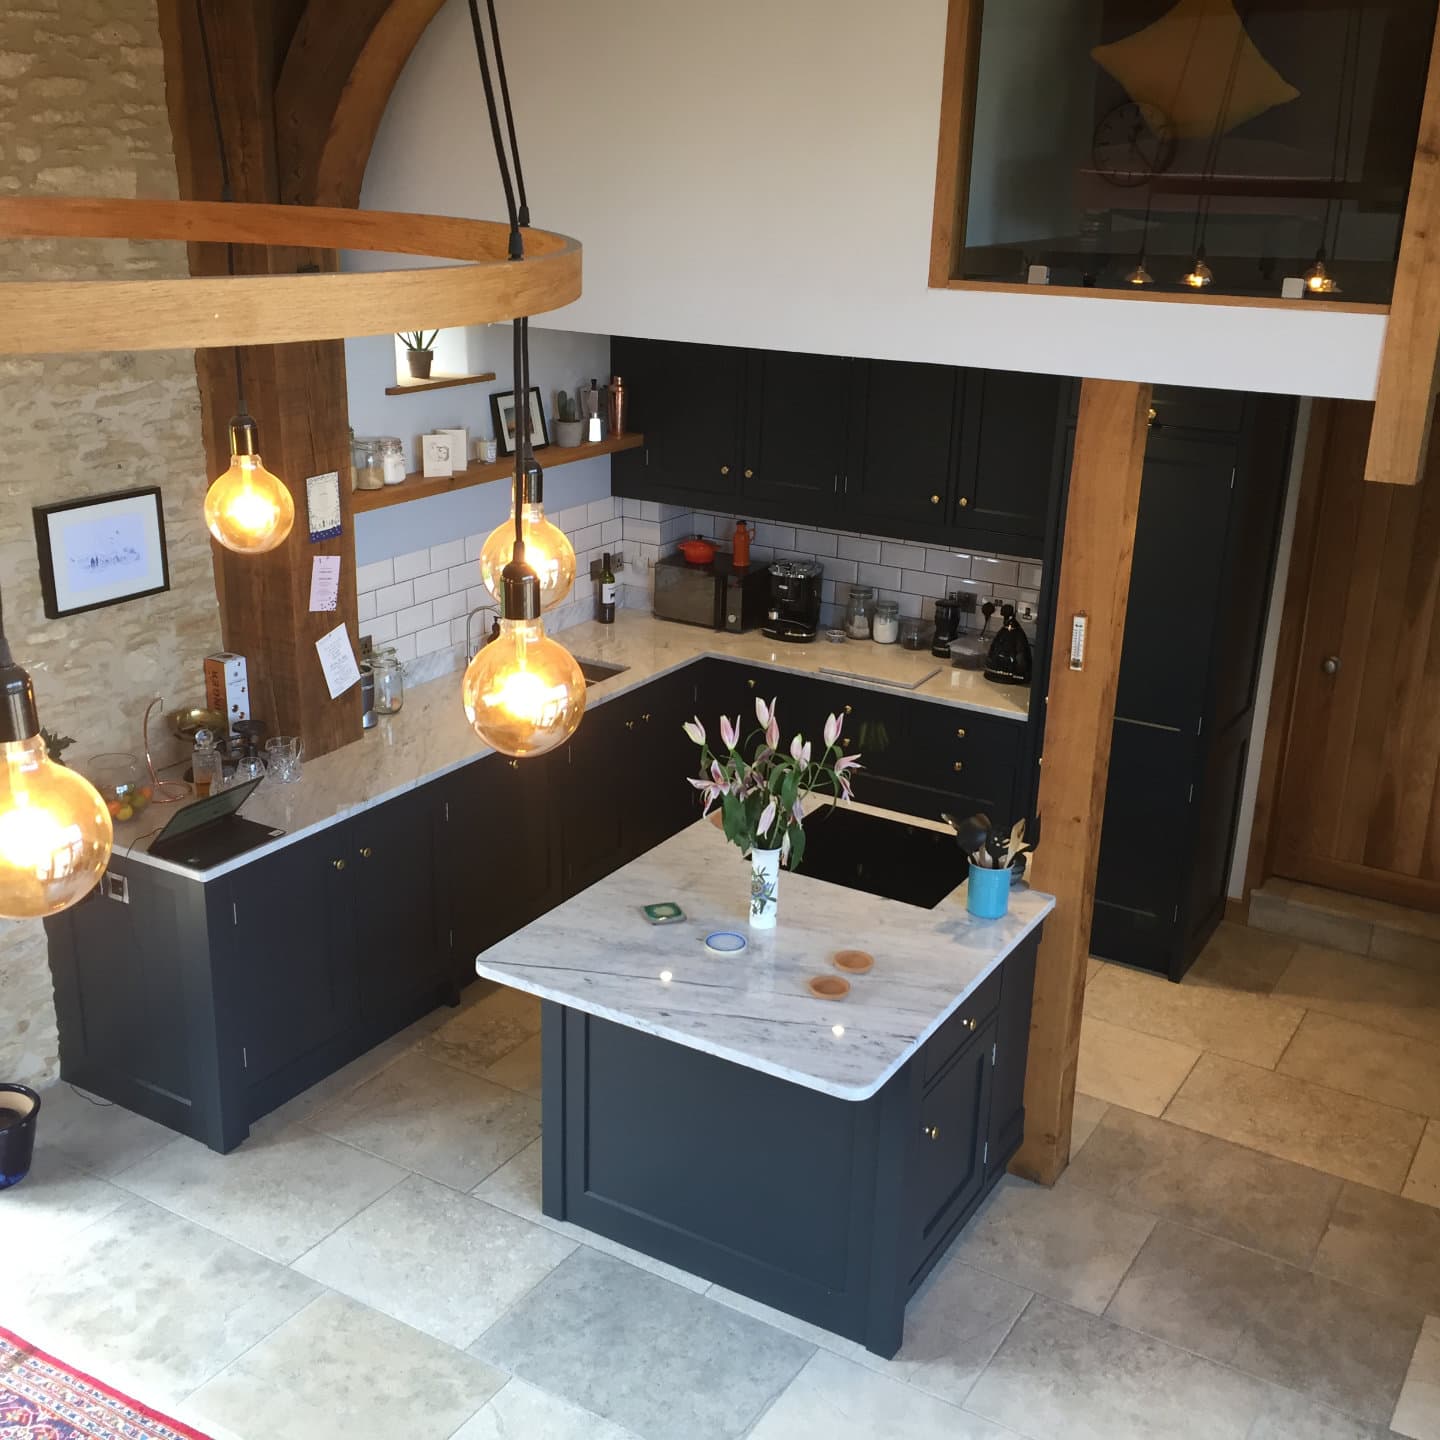 A beautiful kitchen with island counter in a barn conversion